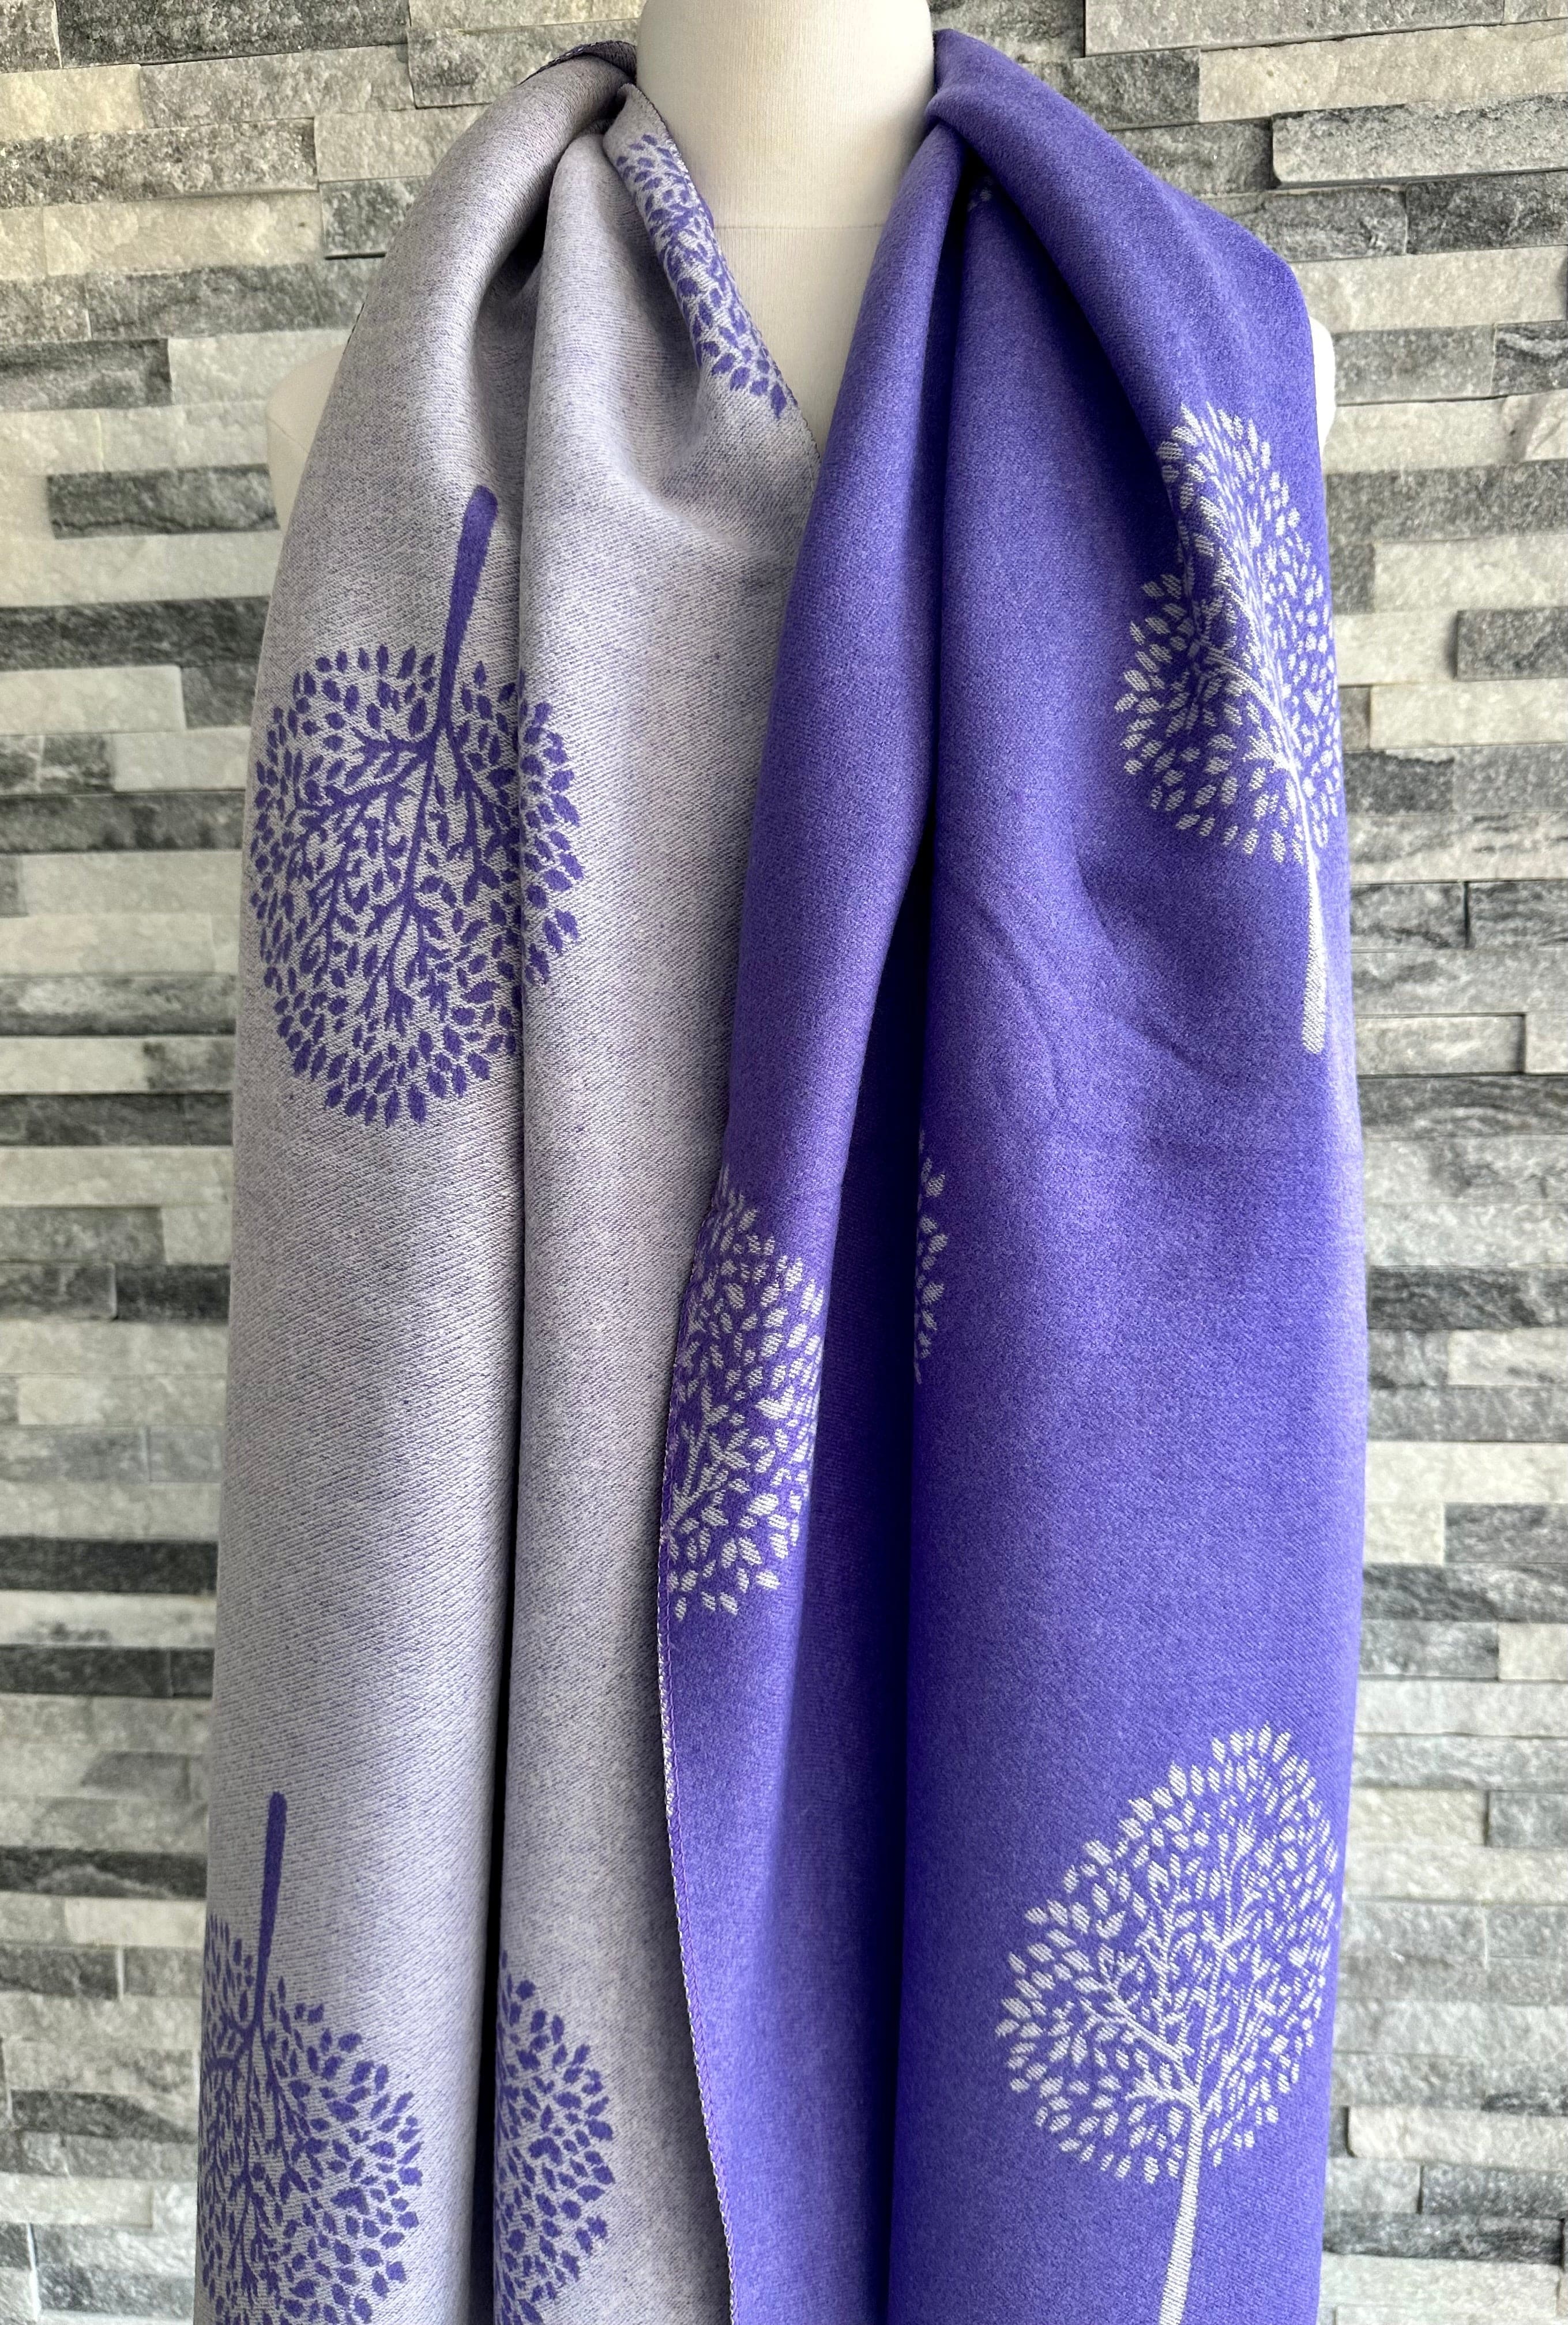 lusciousscarves Violet and Grey Reversible Mulberry Tree Scarf / Wrap , Cashmere blend